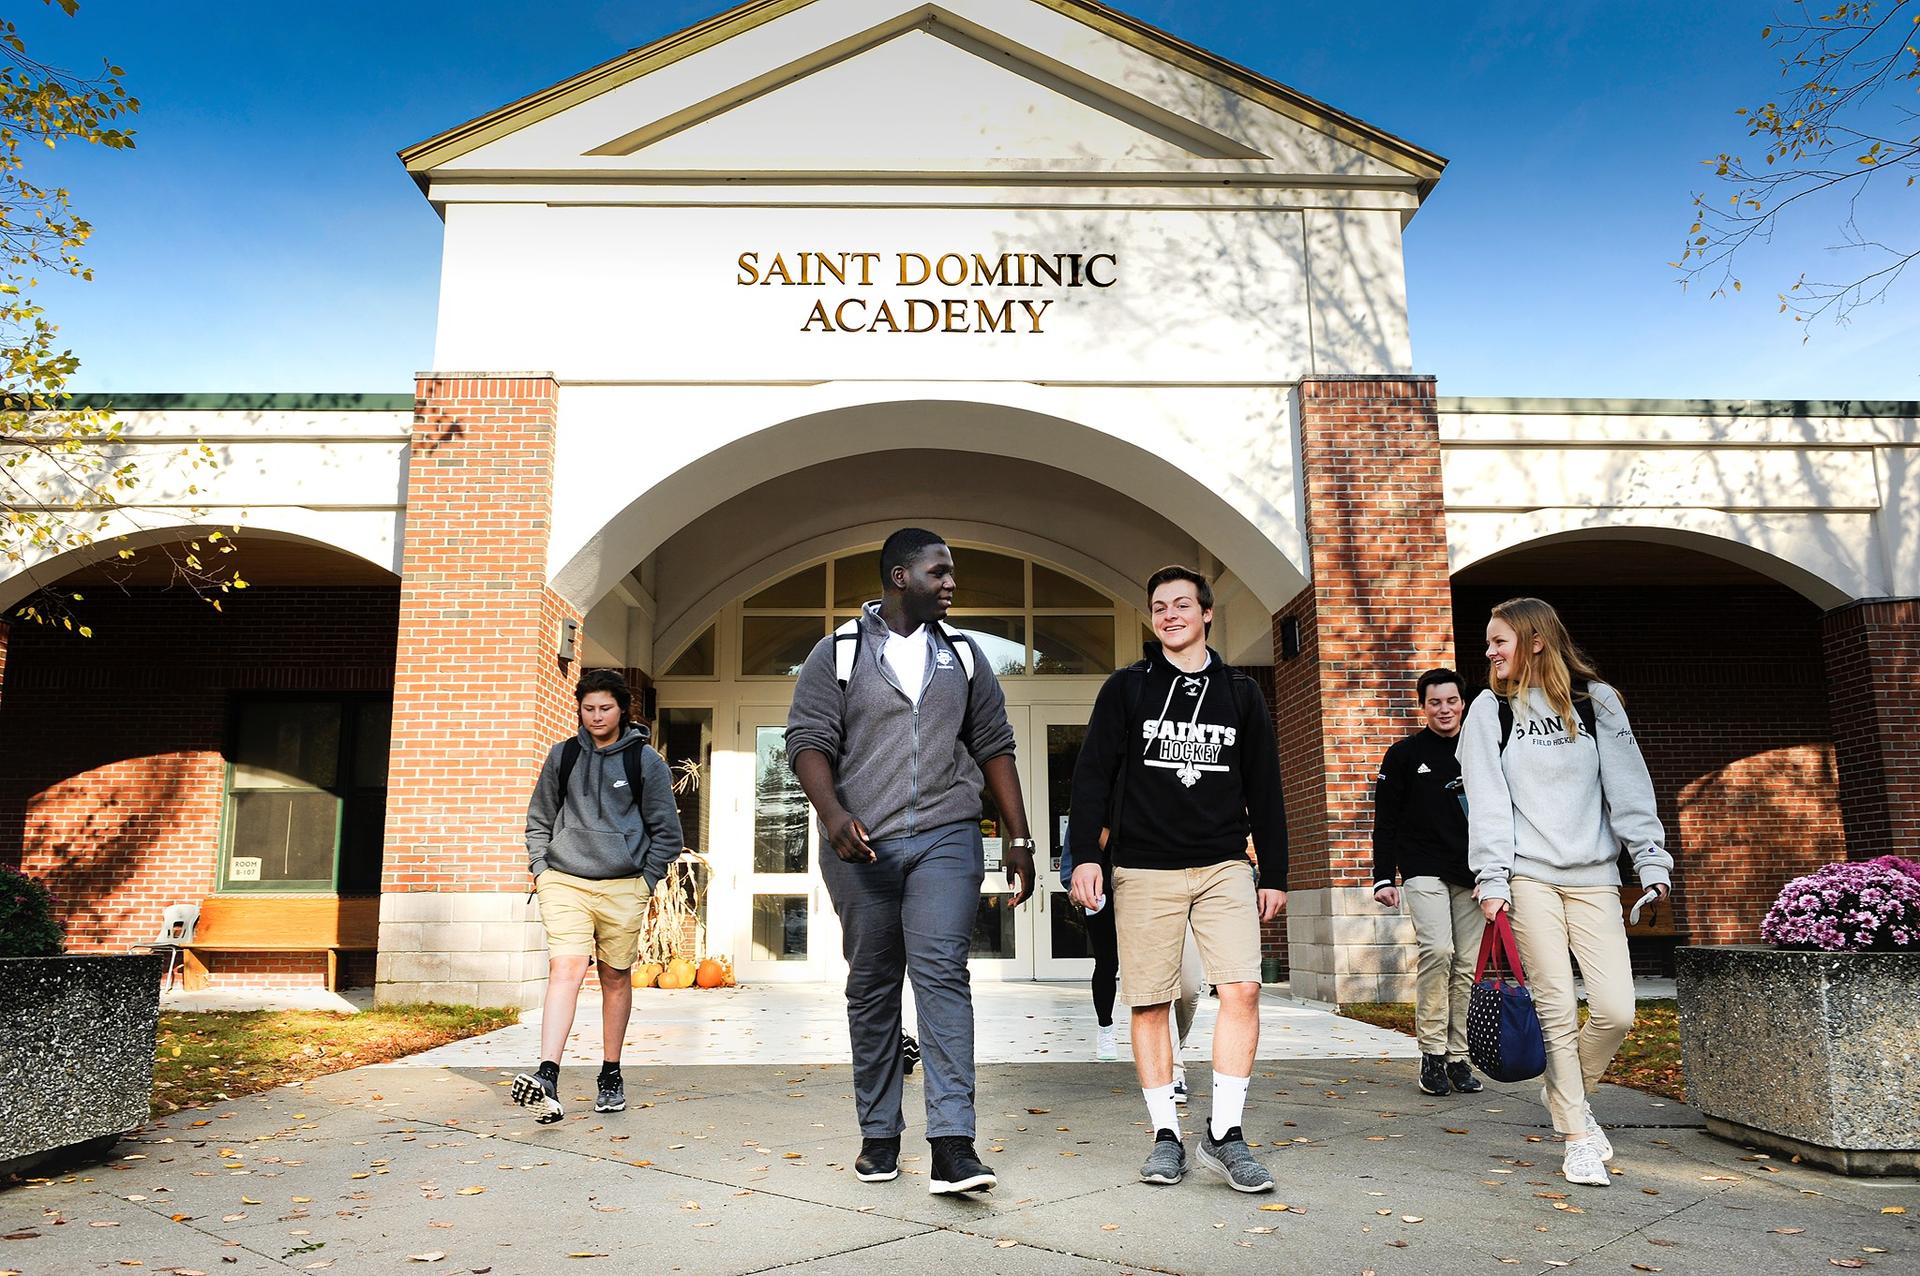 Catholic family, school sue Maine over exclusion from tuition assistance program